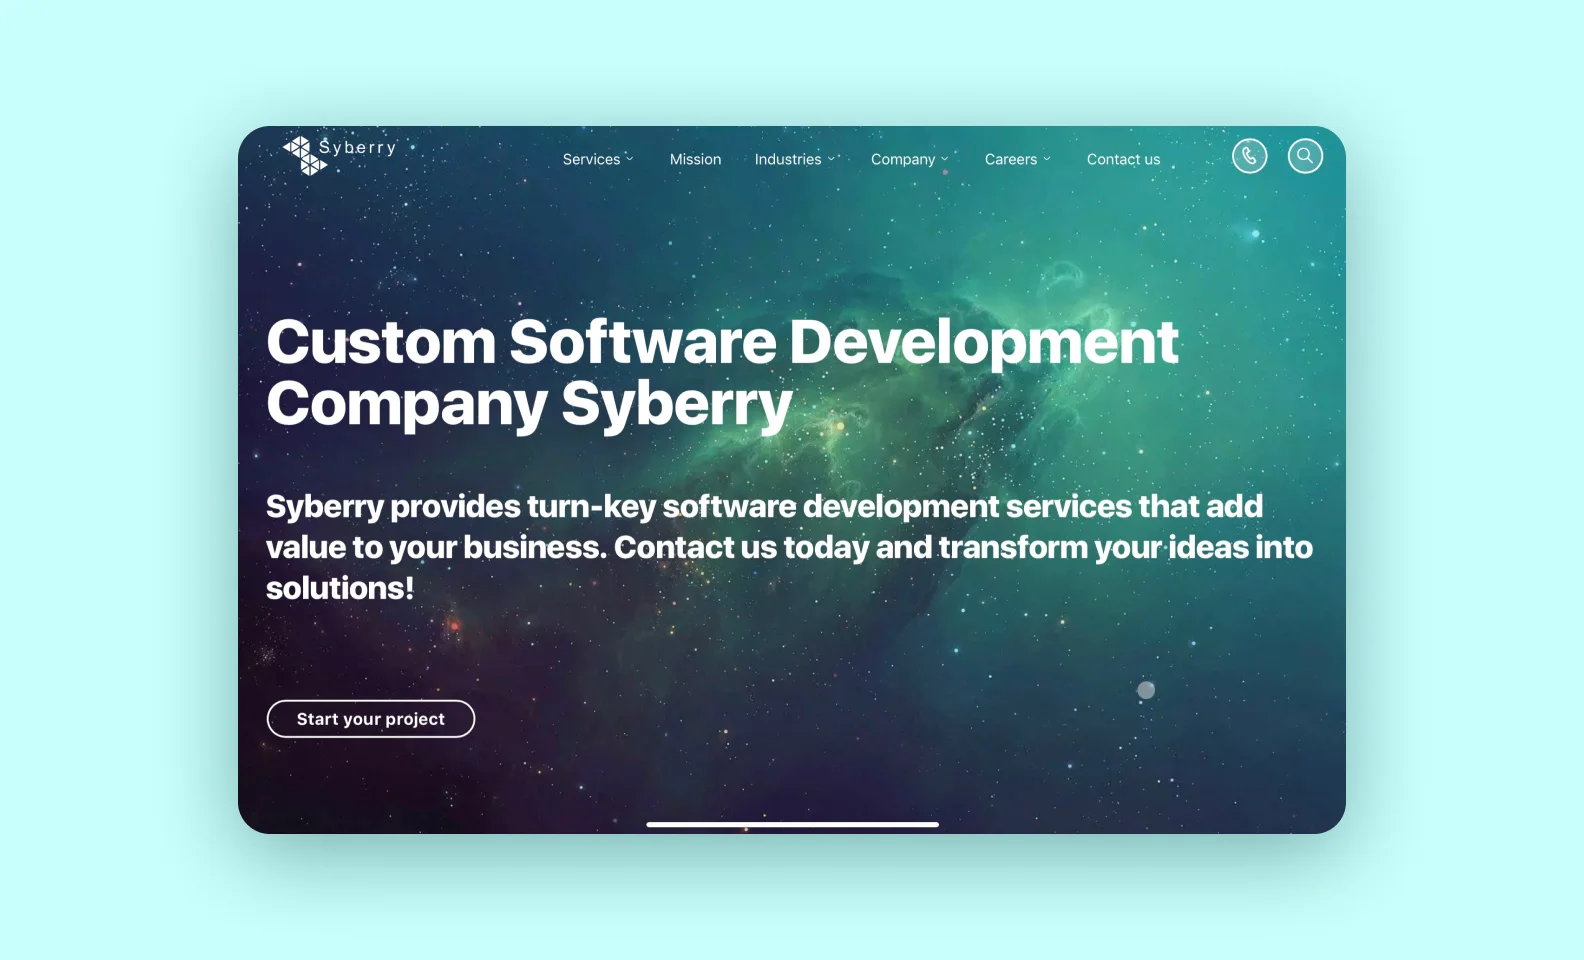 Syberry software outsourcing company